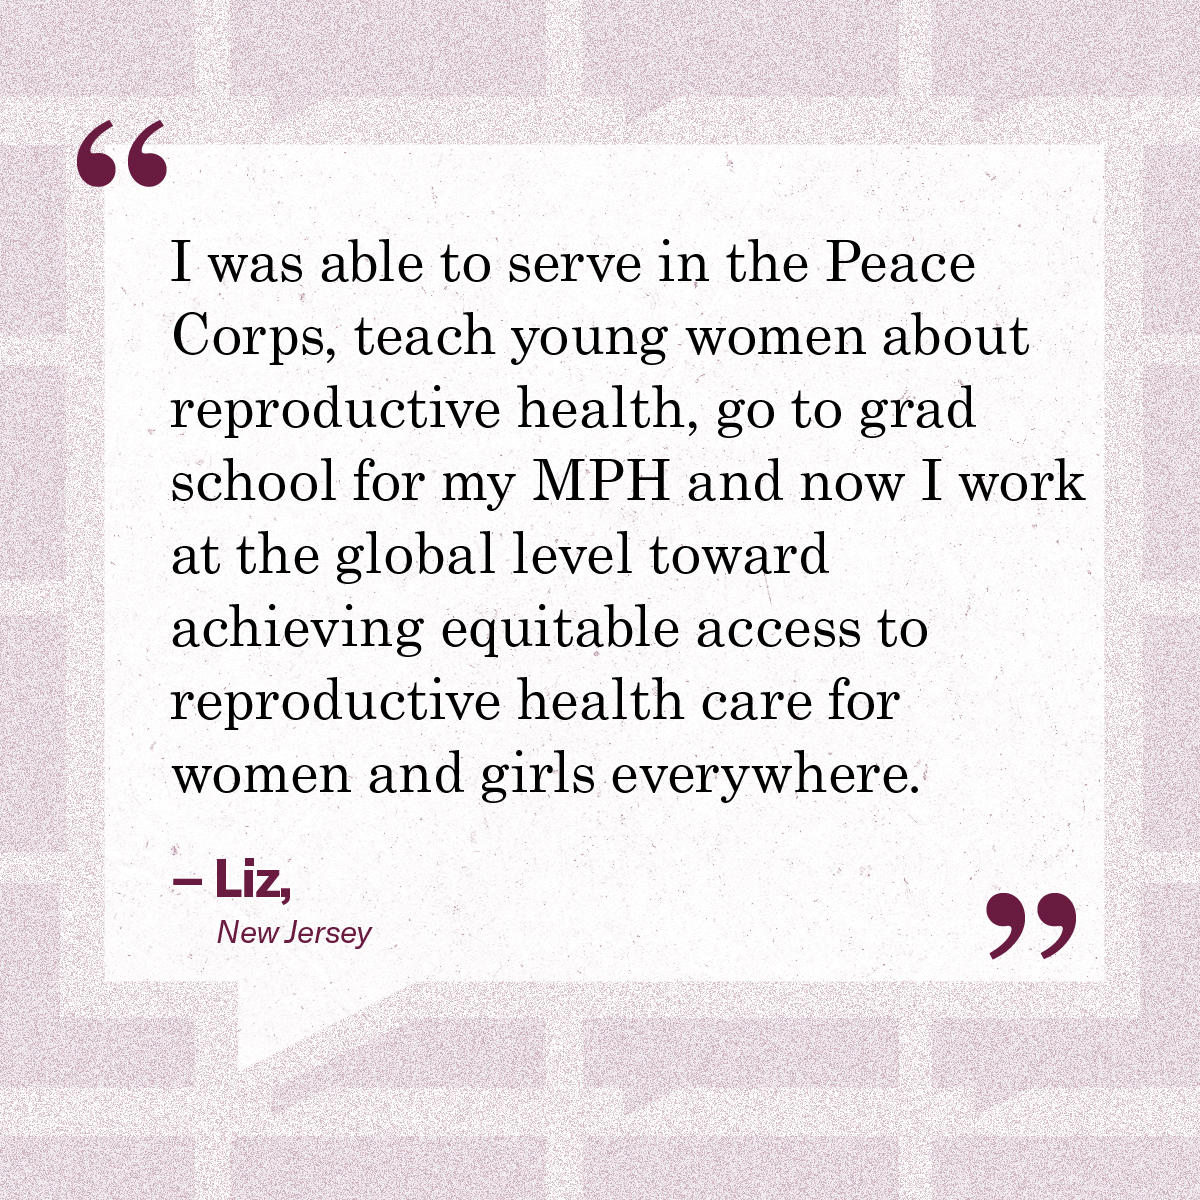 "I was able to serve in the Peace Corps, teach young women about repro health, go to grad school, and now I work at the global level towards achieving equitable access to repro health."